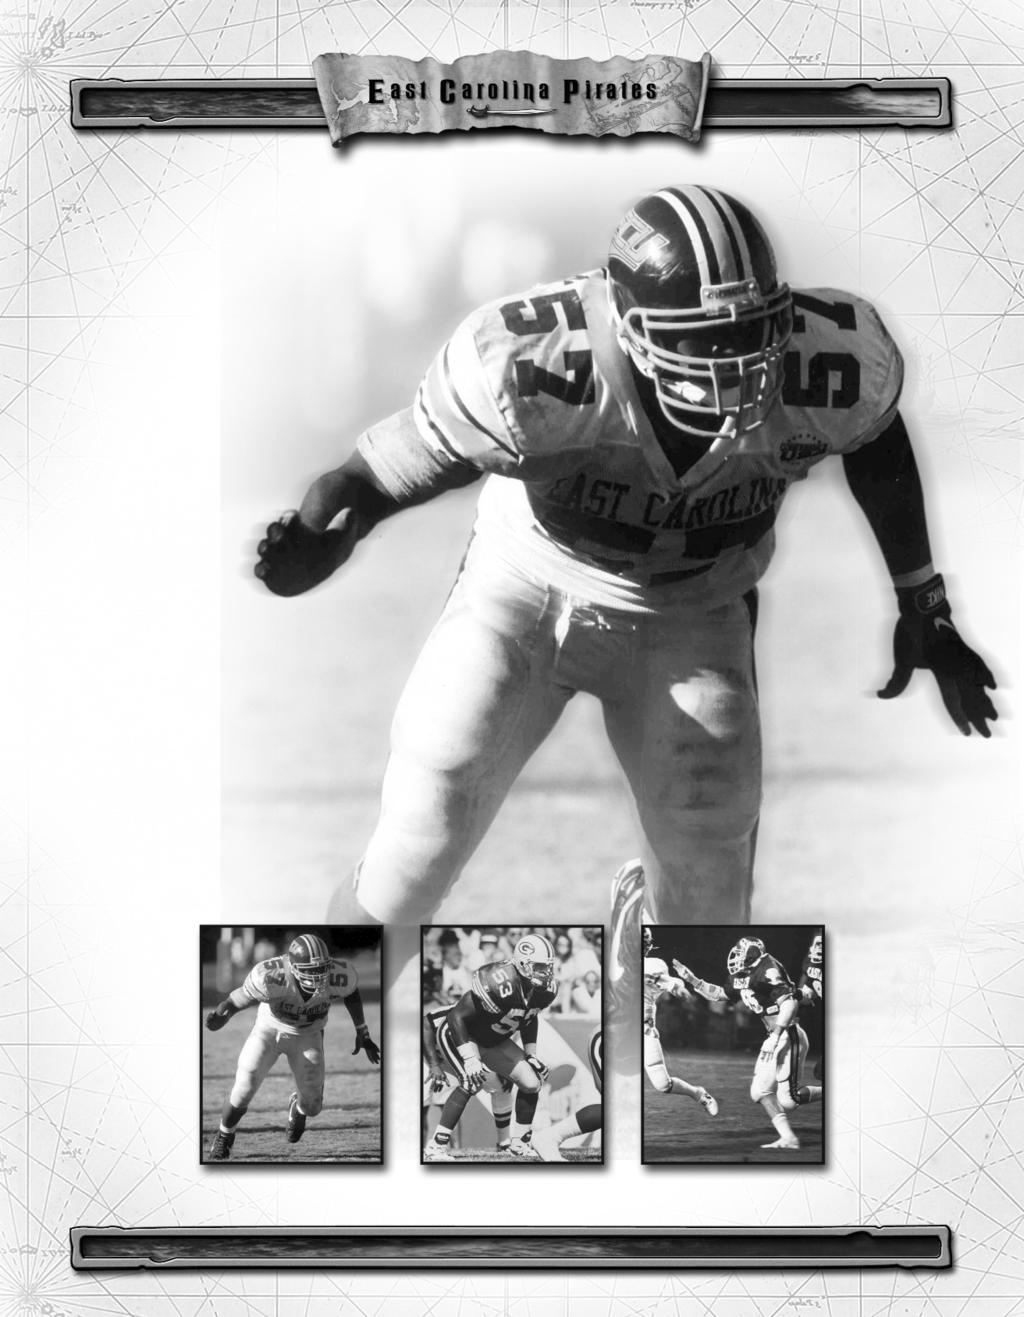 Roderick Coleman (1995-98) holds six sack records for the Pirates, including the career mark with 39.